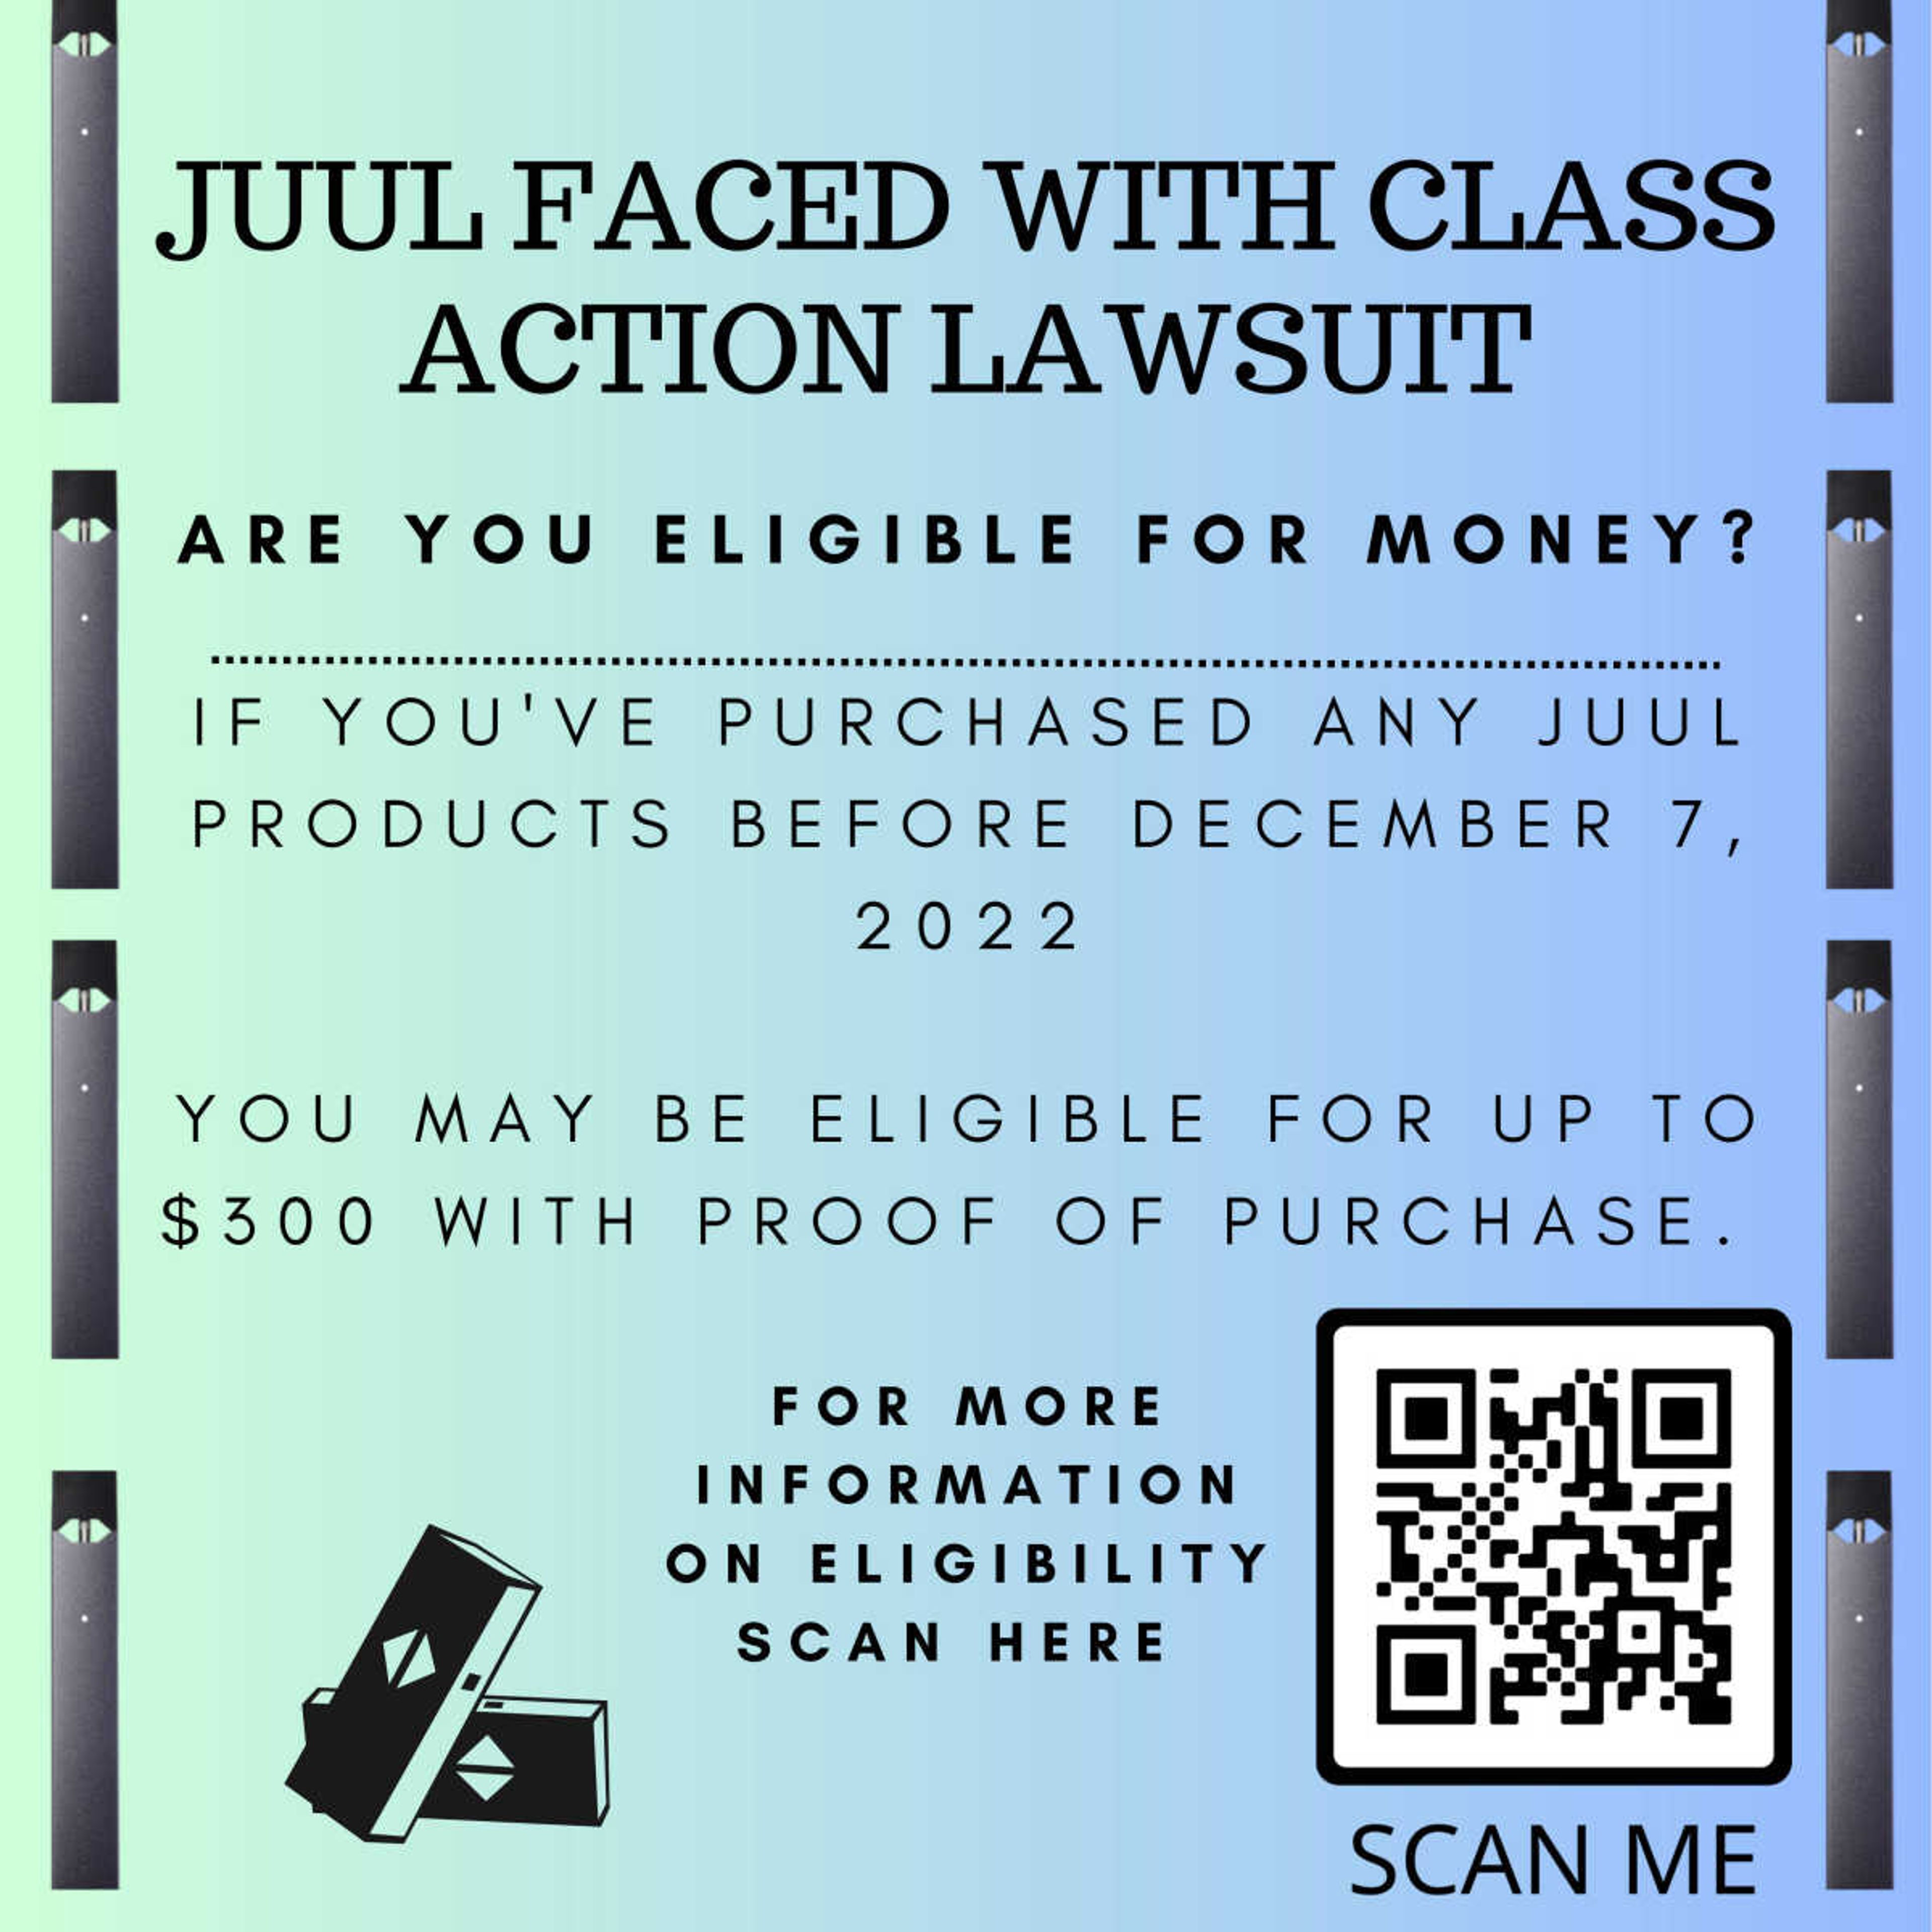 JUUL faced with class action lawsuit